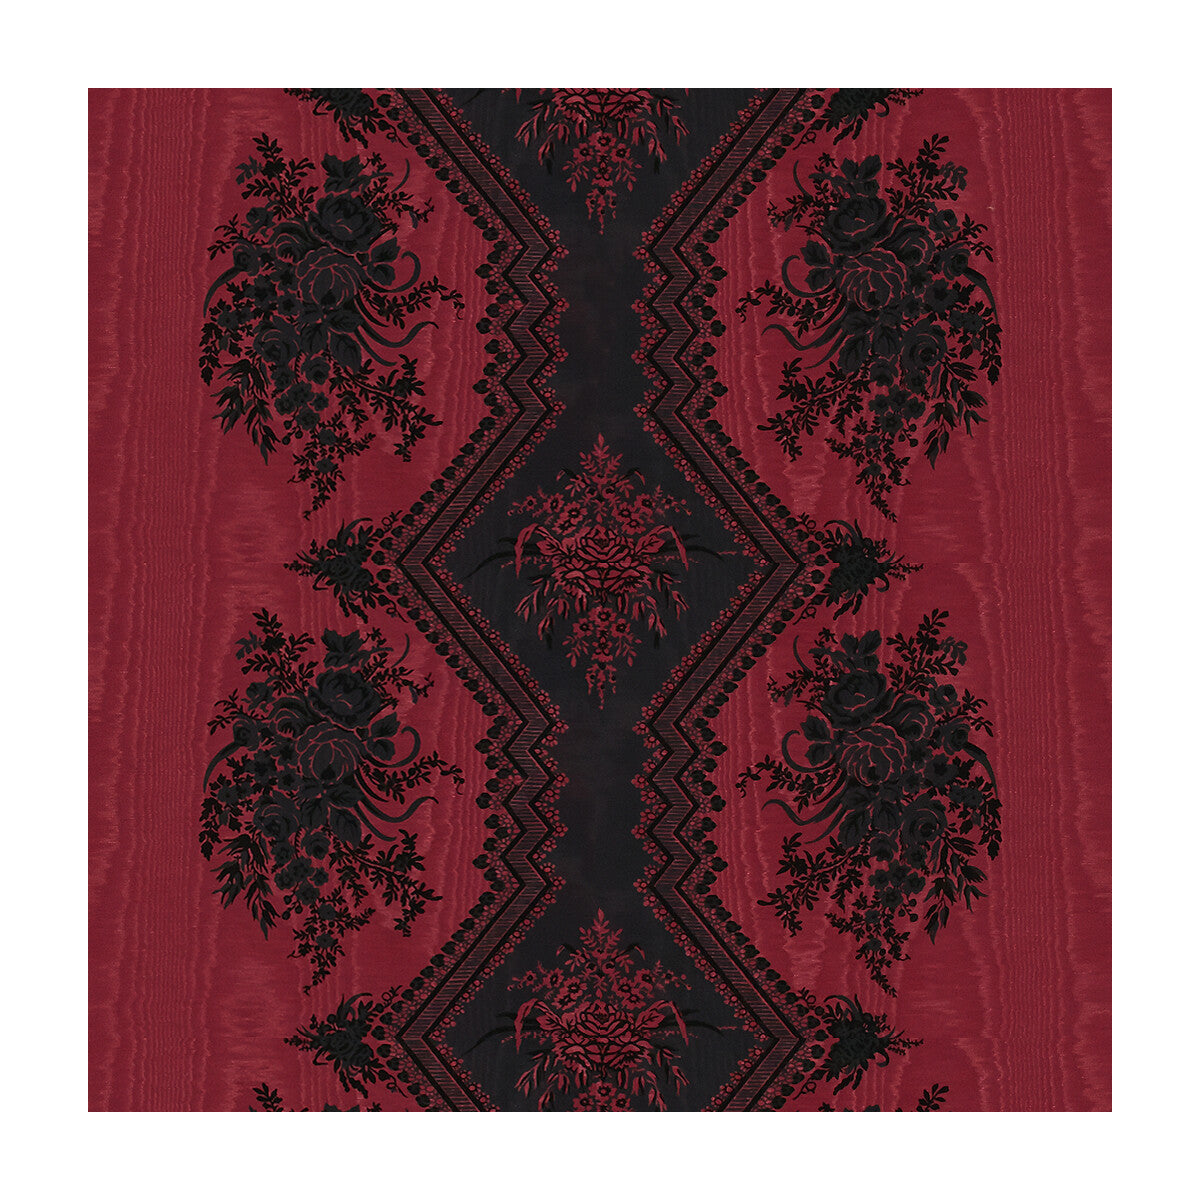 Coppelia Moire fabric in rouge color - pattern 8015137.9.0 - by Brunschwig &amp; Fils in the Madeleine Castaing collection